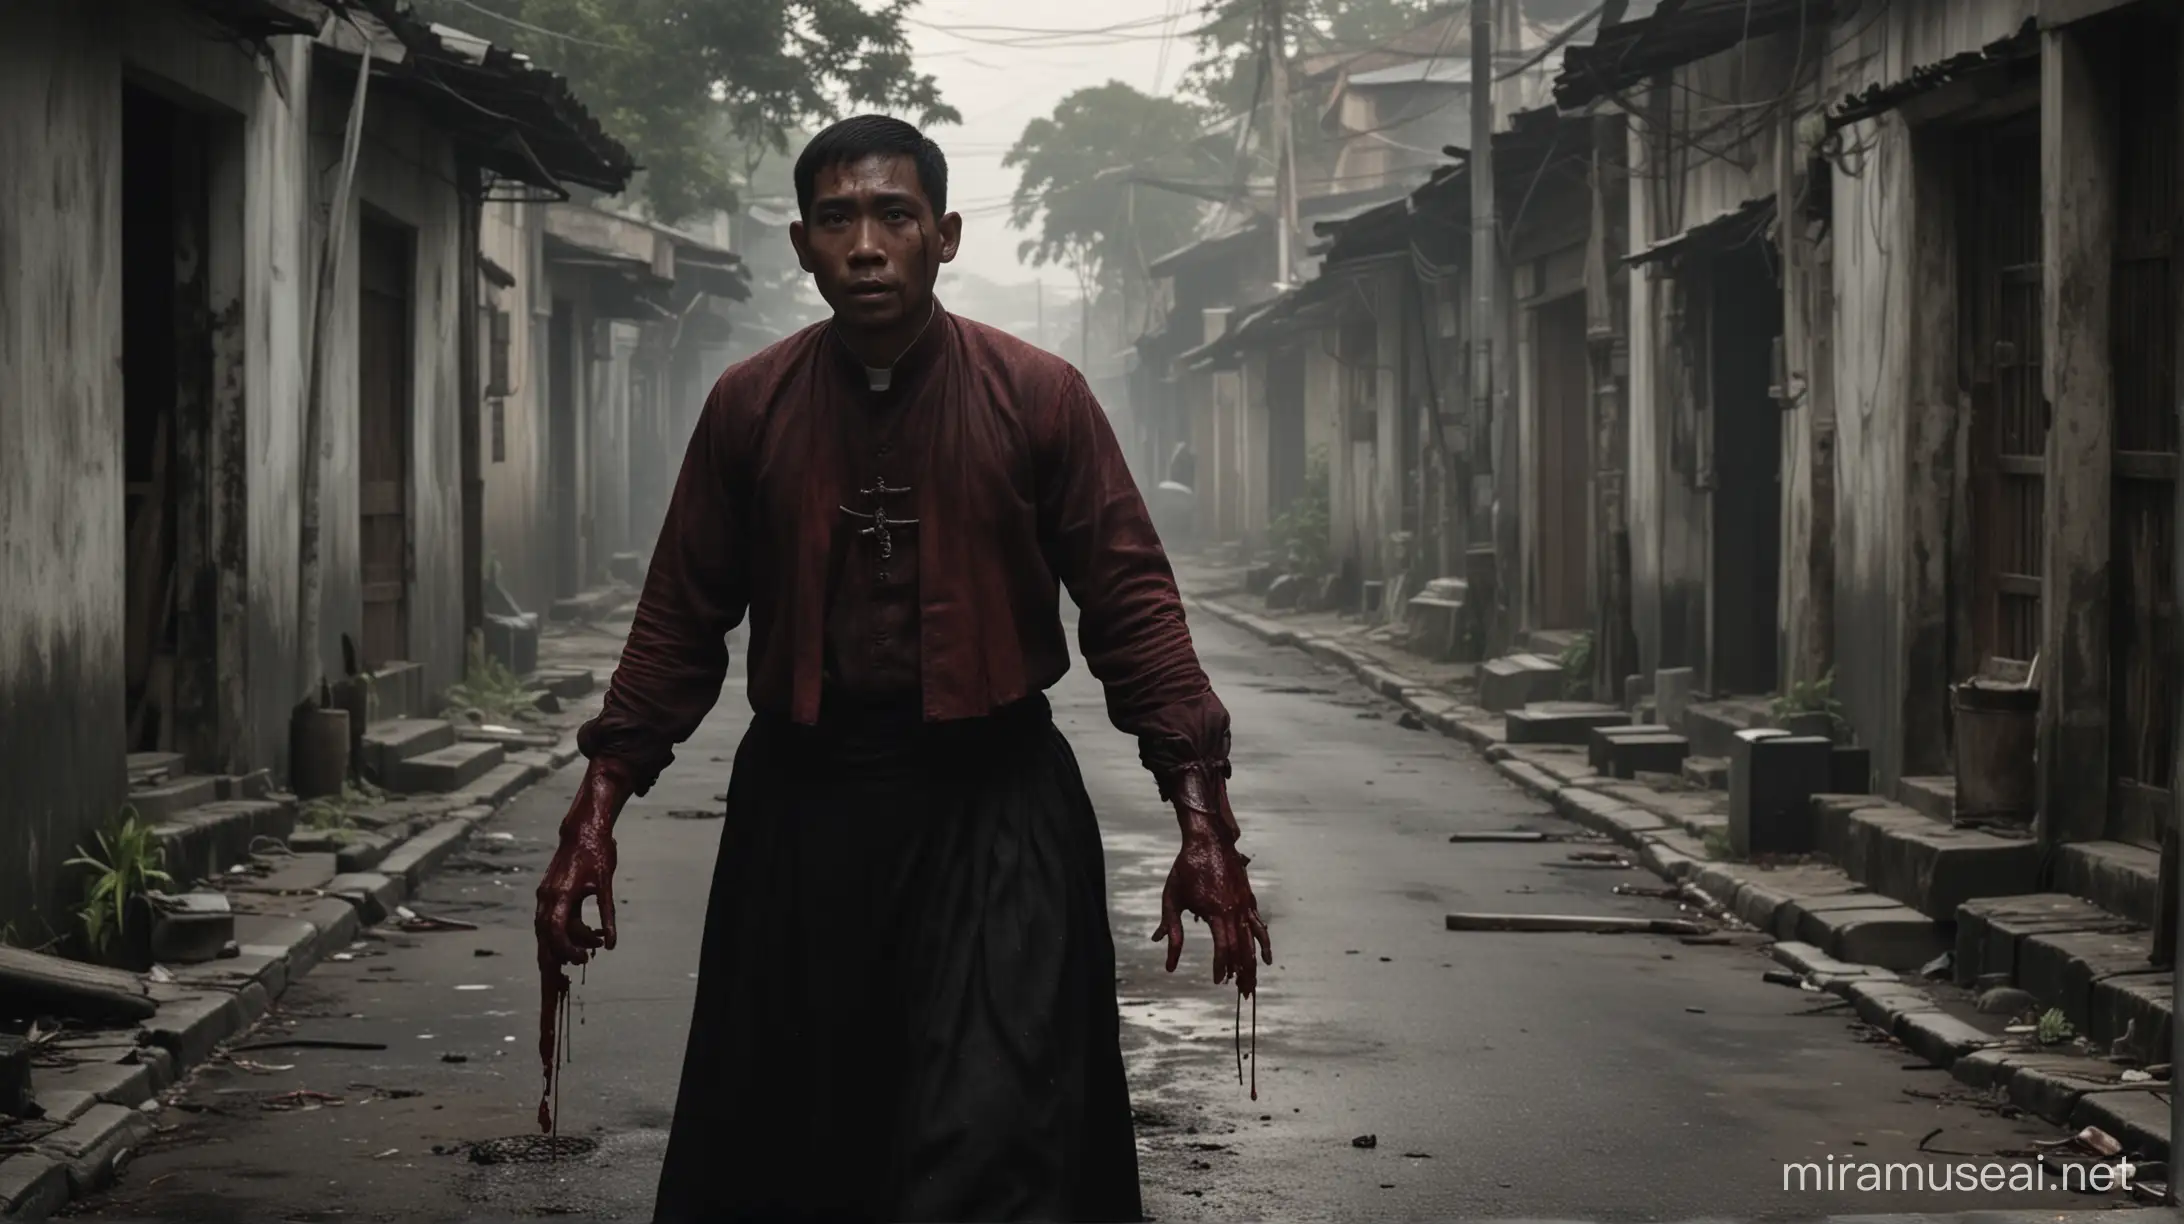 A 19th-century Filipino Catholic murderer priest with bloody hands, prowling alone in the evening streets of colonial era Philippines, horror, cinematic